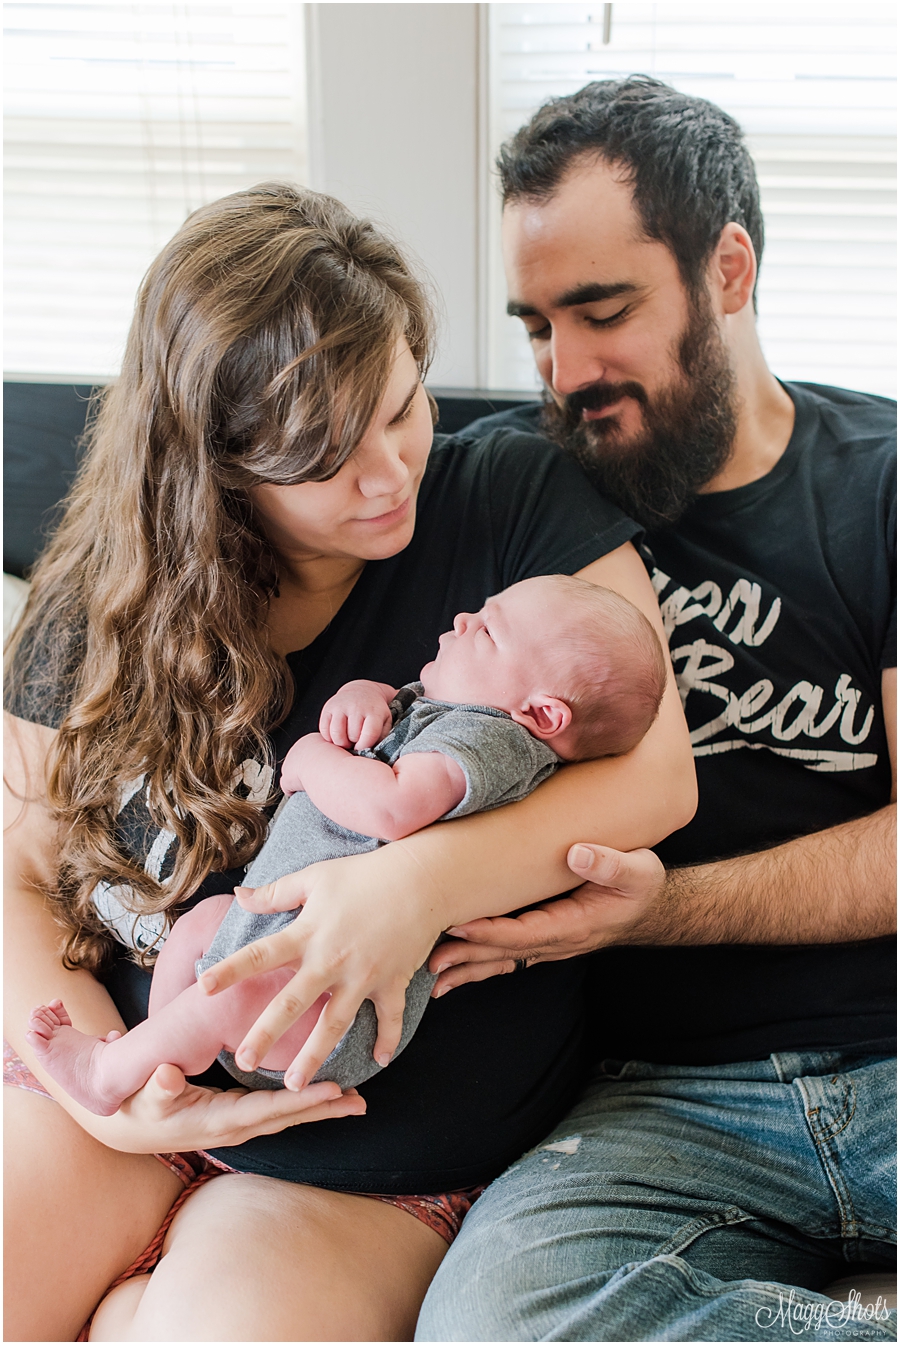  MaggShots Photography, MaggShots, Dallas Professional Photographer, Dallas Professional Photography, Destination Photography, Dallas Family Portraits, Dallas Family Session, Family Portraits, Dallas Based Photographer, Texas Photographer, Lifestyle Newborn Session, Grow with me, Baby Boy